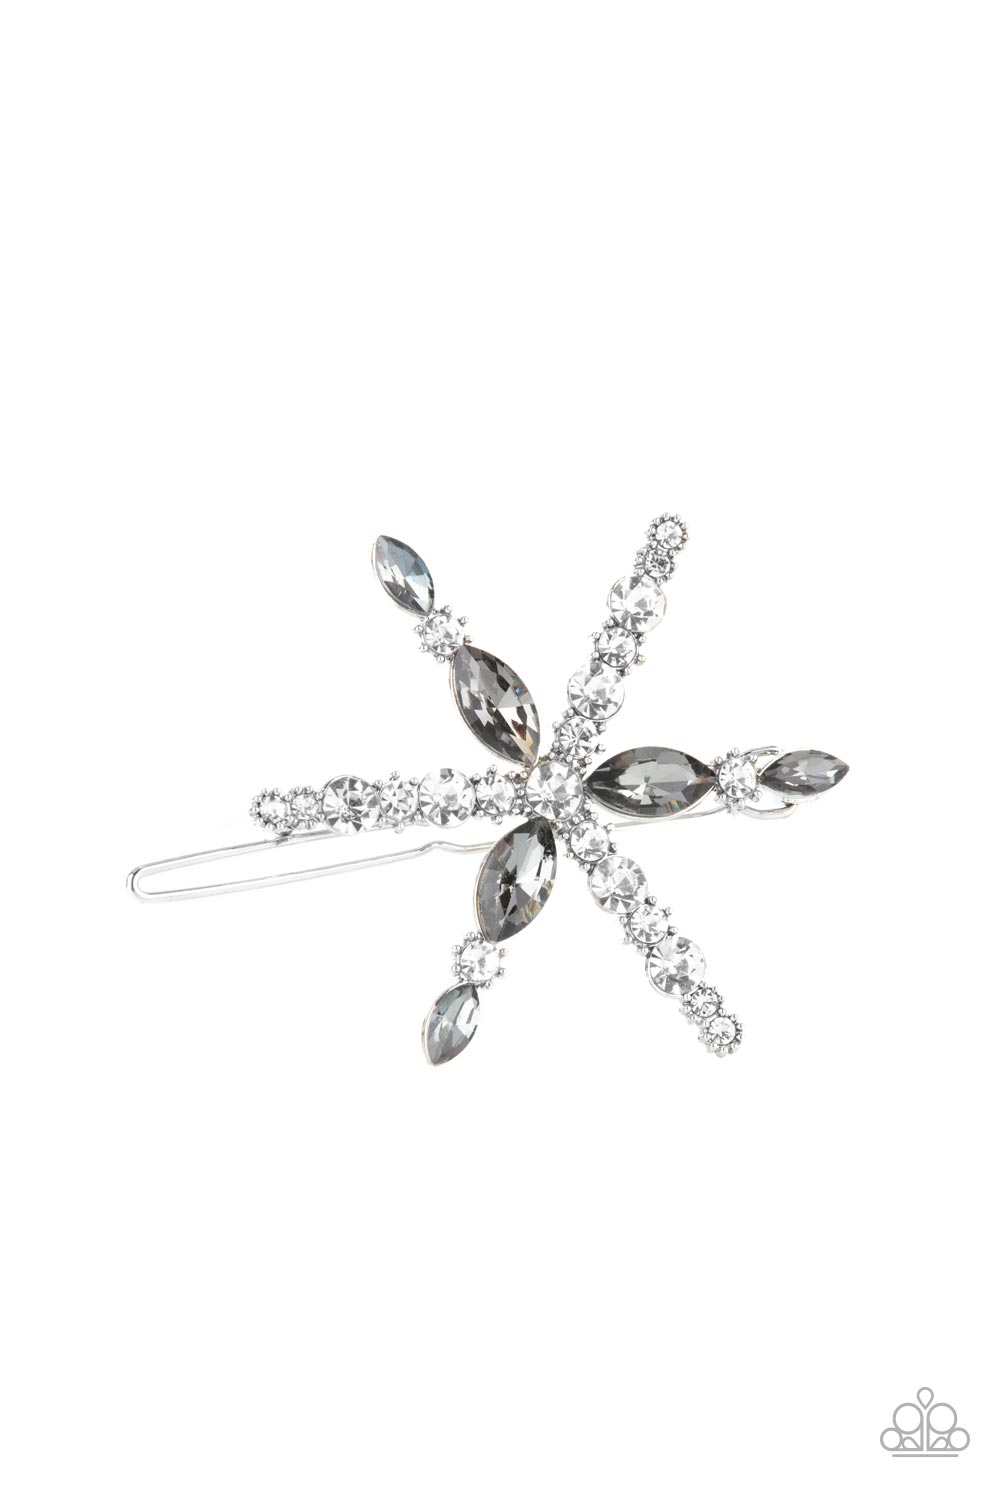 Paparazzi Accessories: Celestial Candescence - Silver Hair Clip